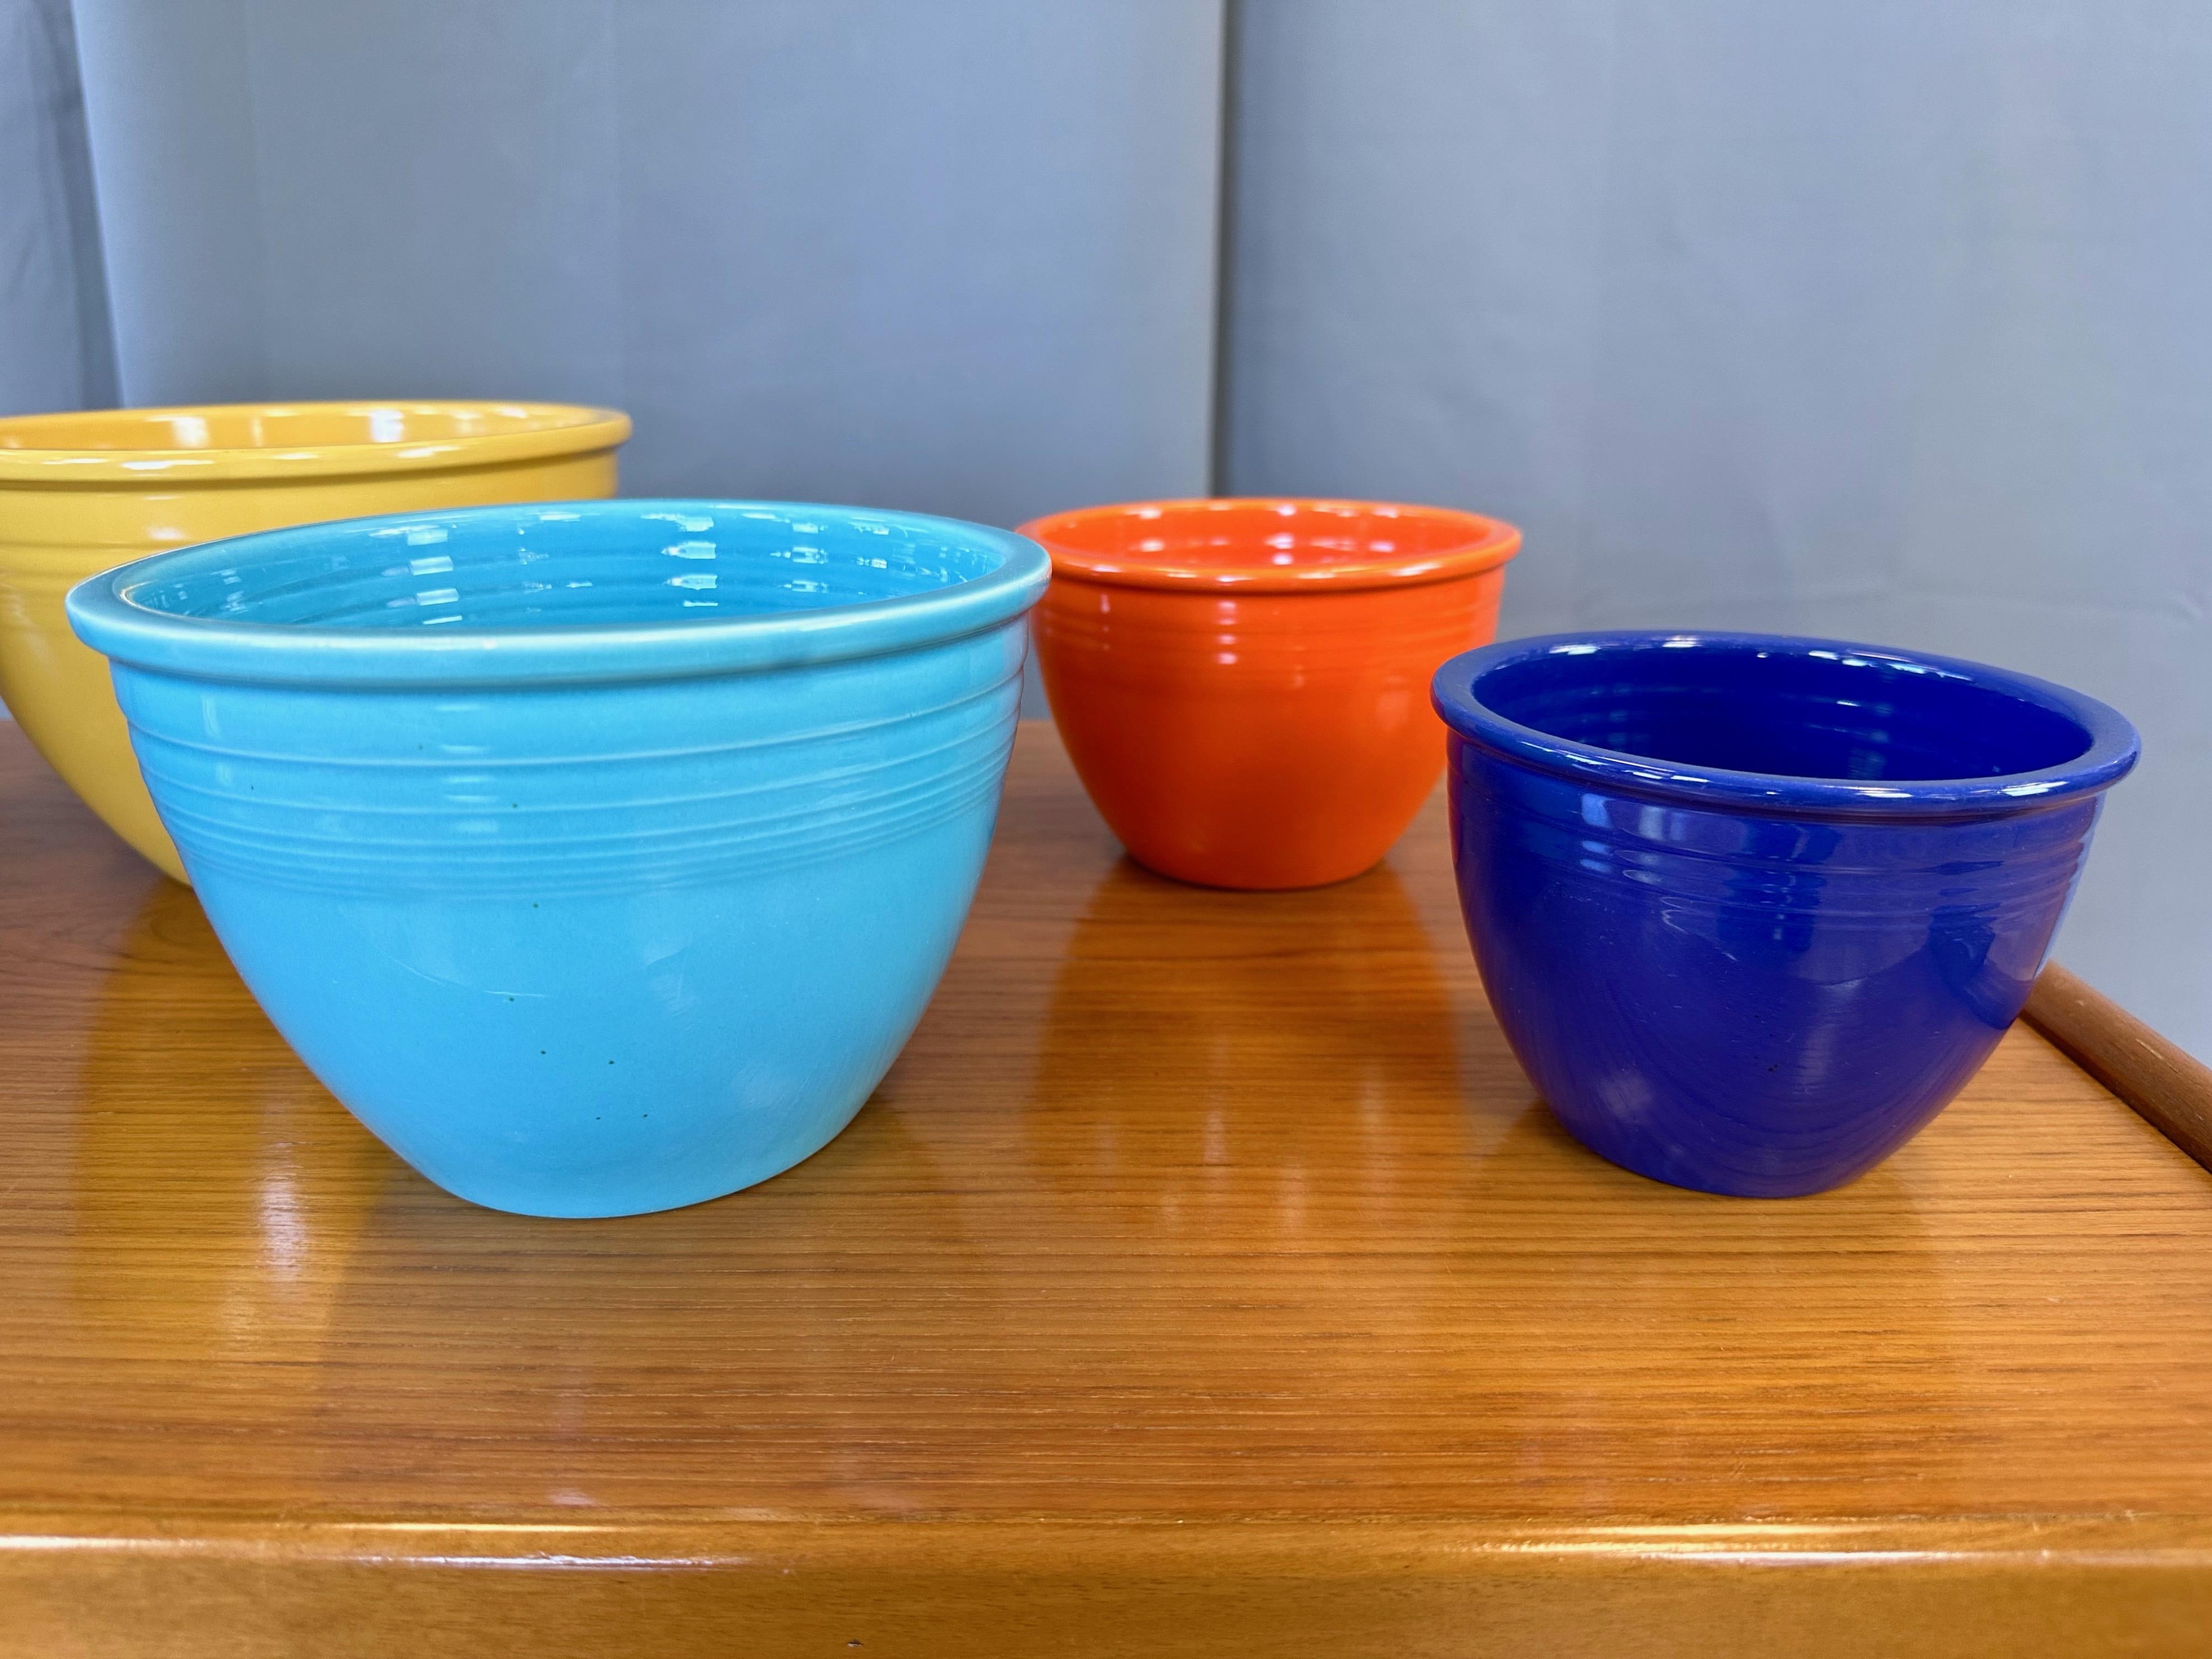 Glazed Early Vintage Fiestaware Nesting Mixing Bowls, Multi-Color Set of Six, c. 1940